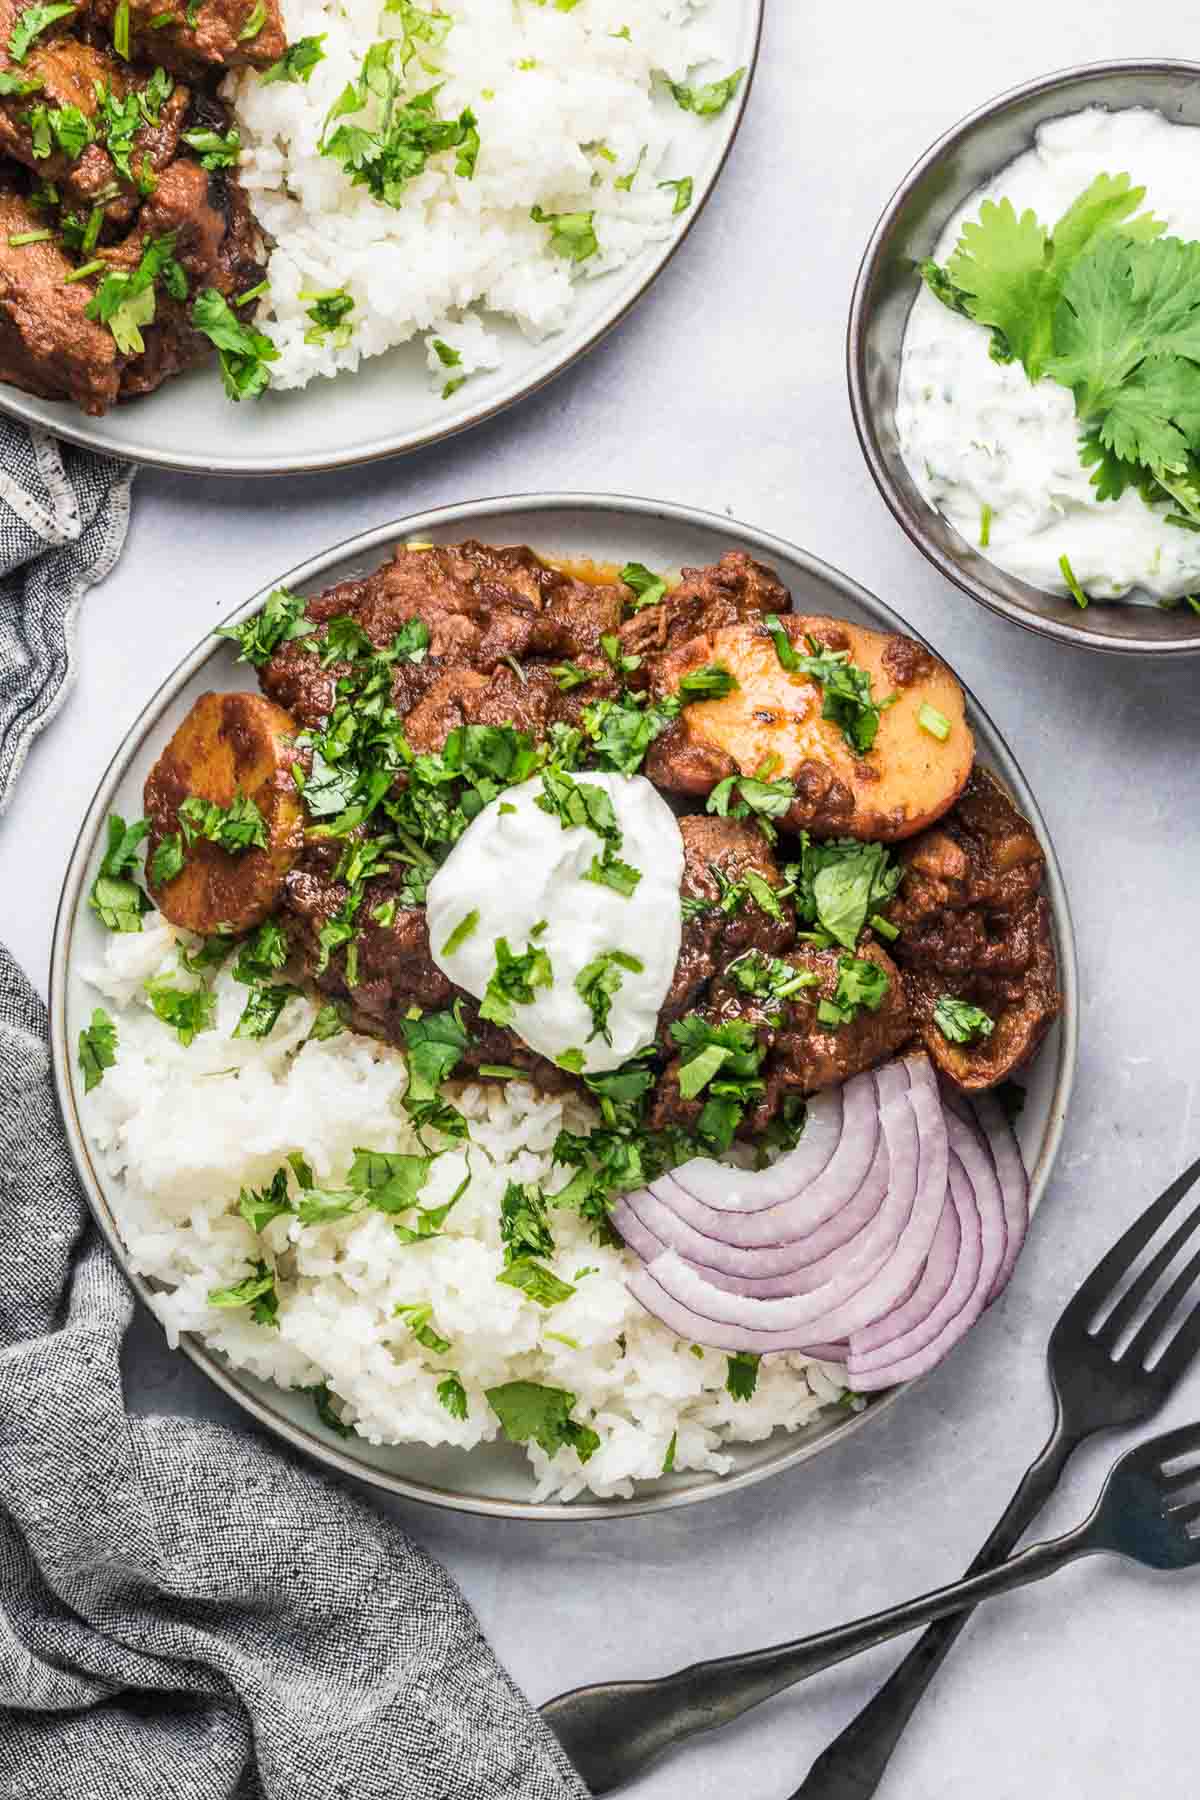 Lamb vindaloo topped with cream, cilantro, and onions.